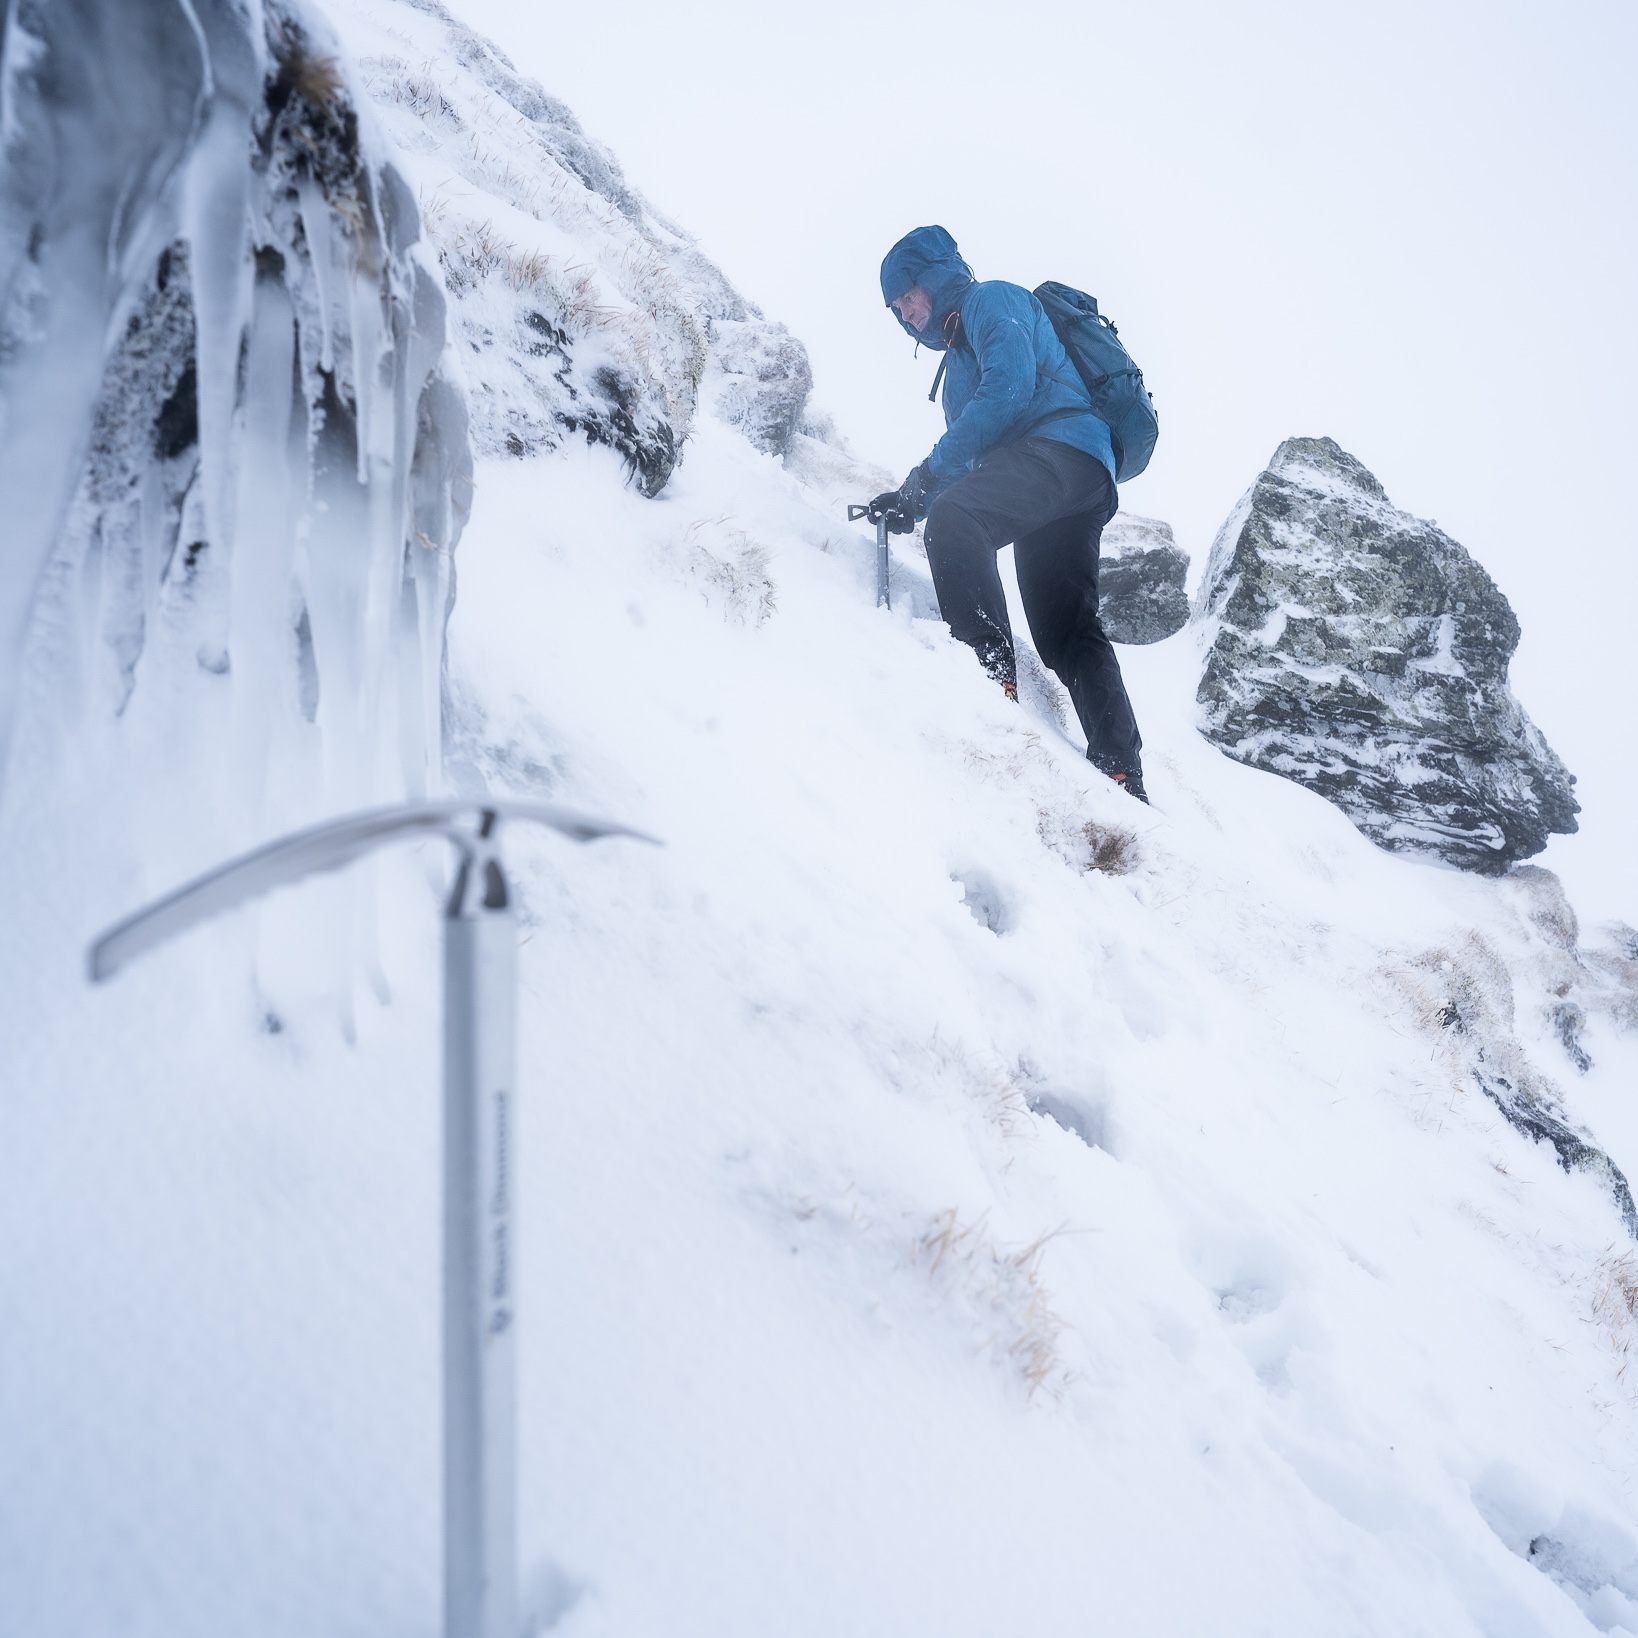 best guides for winter hillwalking and mountaineering glen coe scotland